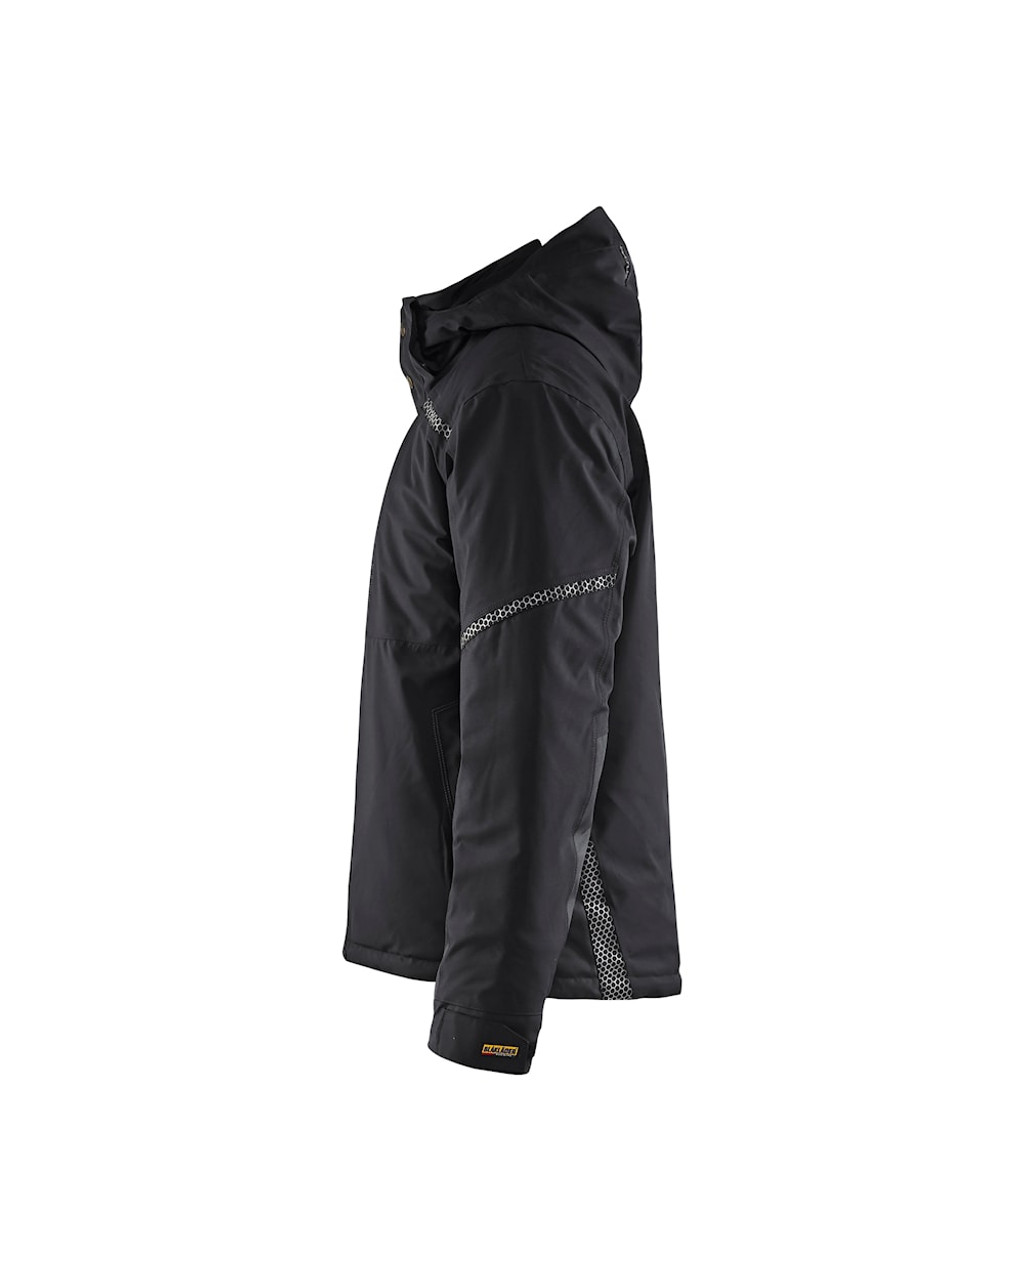 BLAKLADER Polyester Waterproof Black  Jacket  for Electricians that have Full Zip  available in Australia and New Zealand